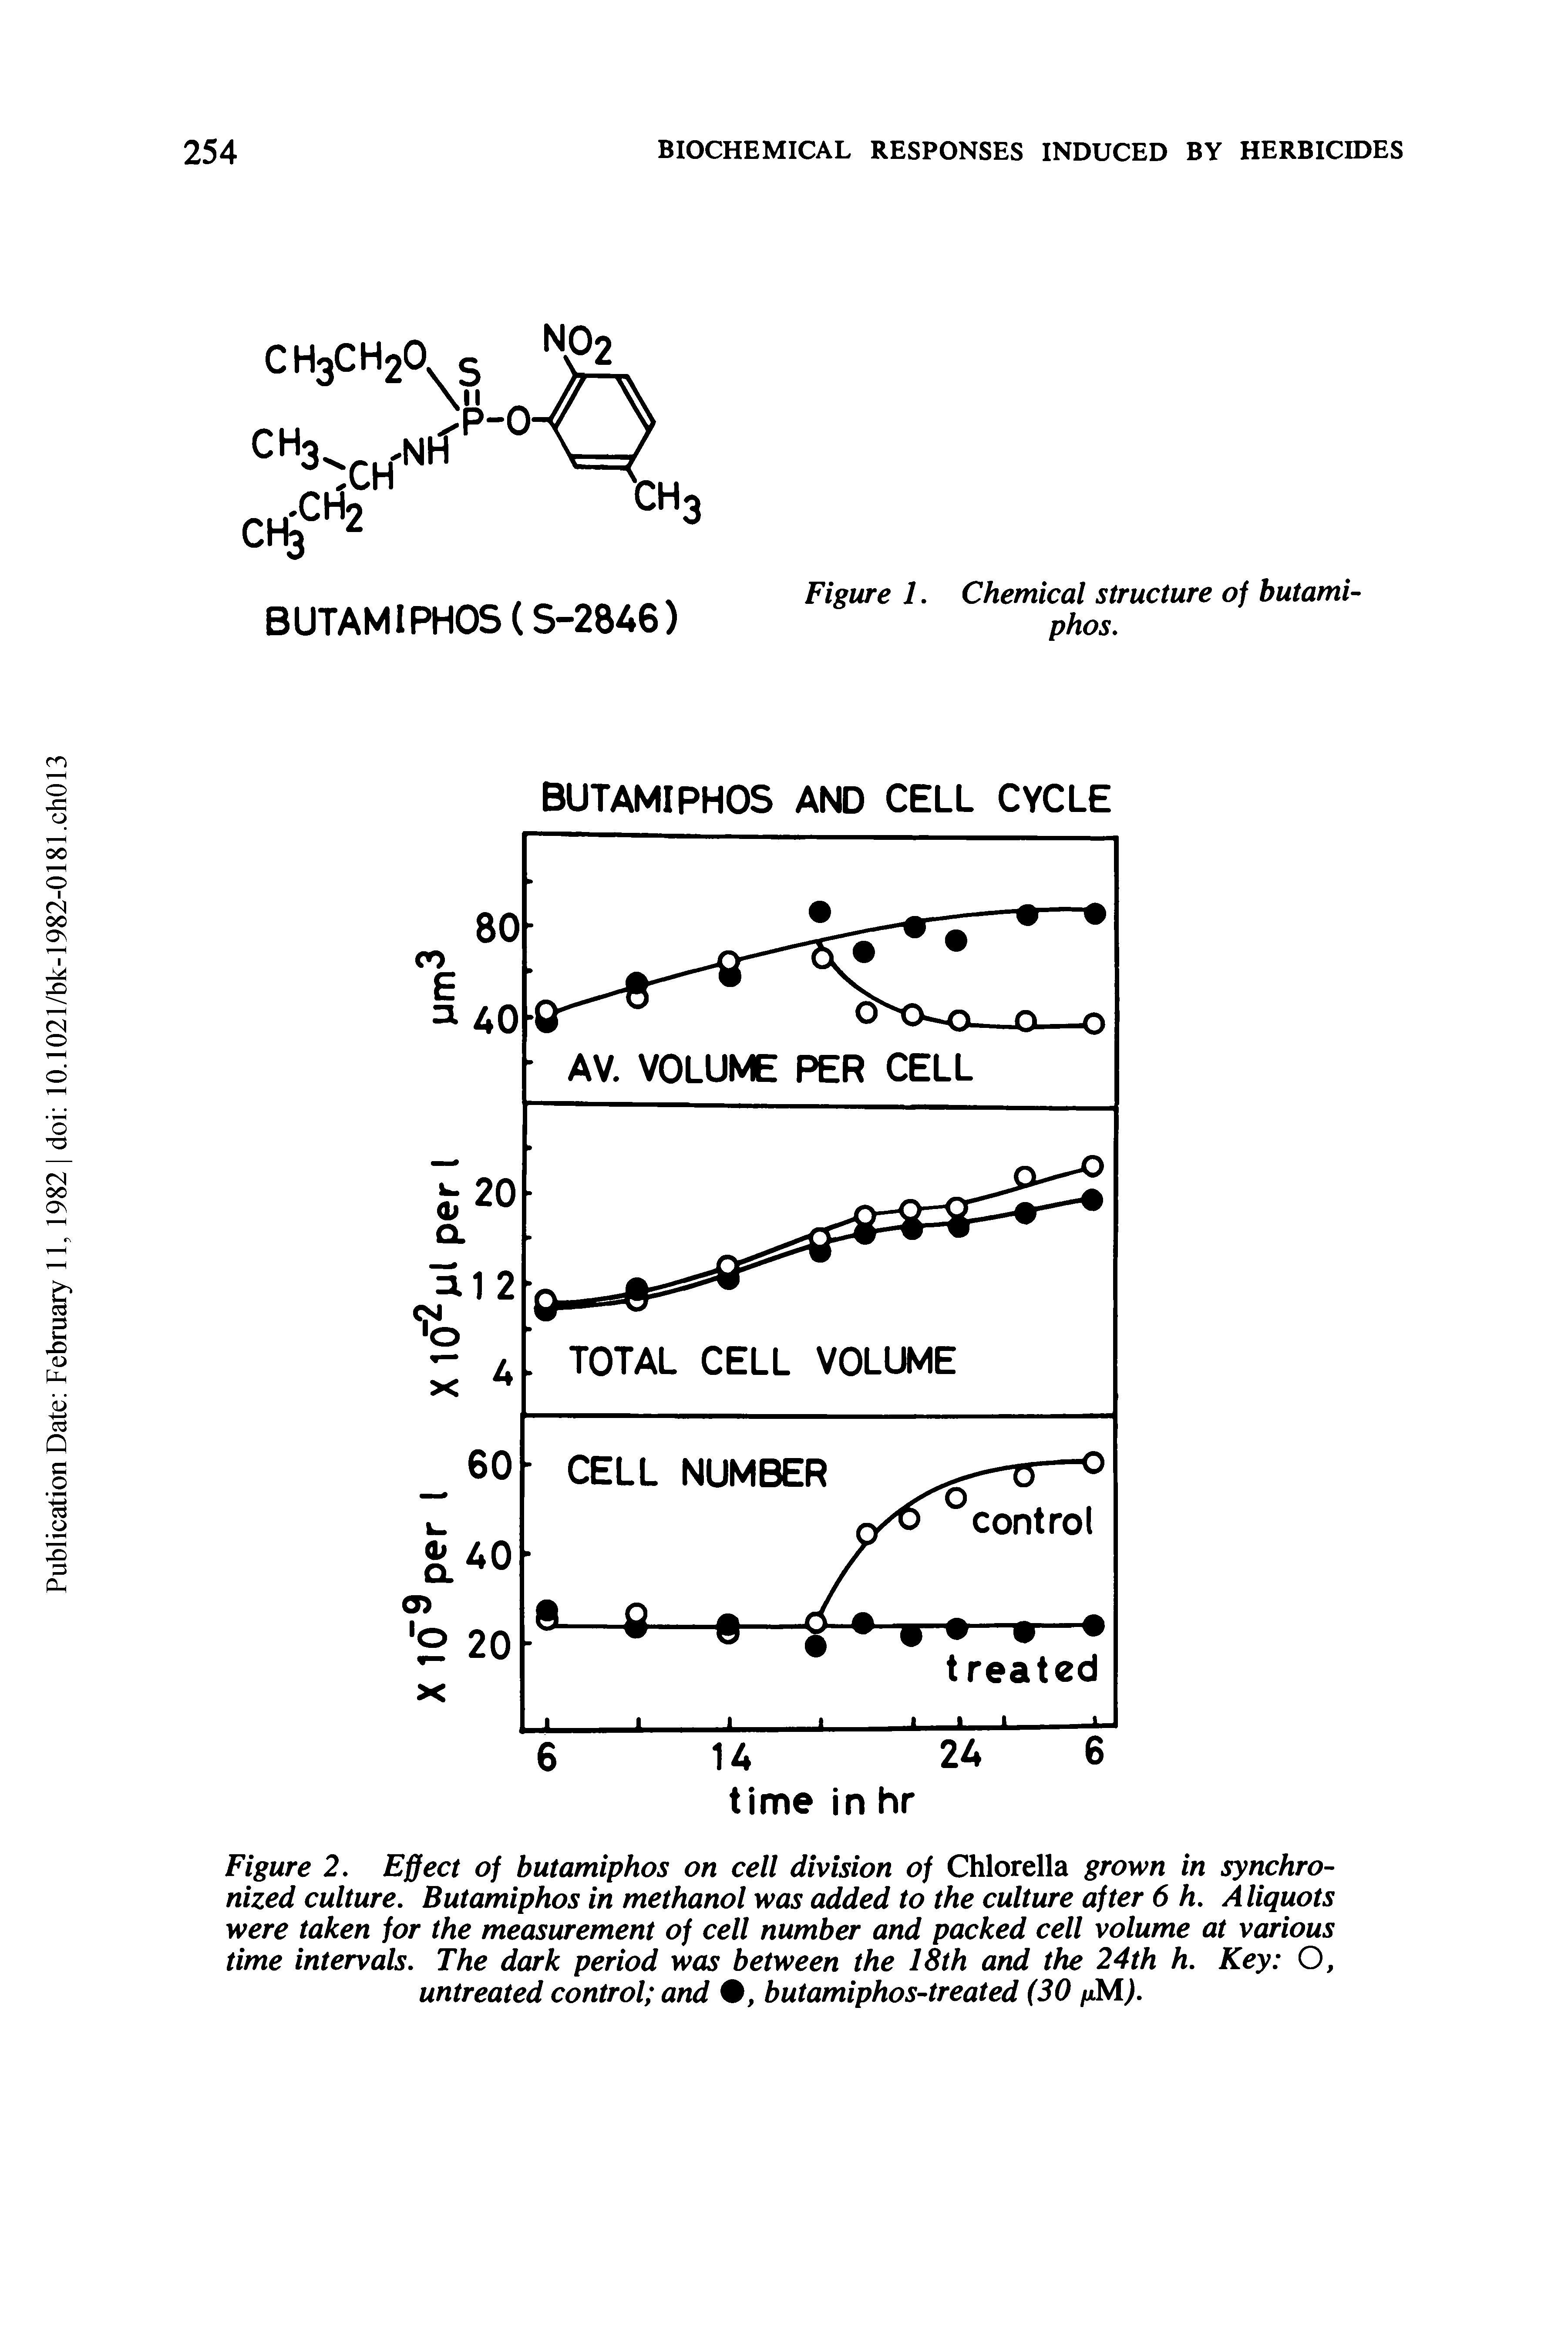 Figure 2. Effect of butamiphos on cell division of Chlorella grown in synchronized culture. Butamiphos in methanol was added to the culture after 6 h. Aliquots were taken for the measurement of cell number and packed cell volume at various time intervals. The dark period was between the 18th and the 24th h. Key O, untreated control and butamiphos-treated (30 /jM).